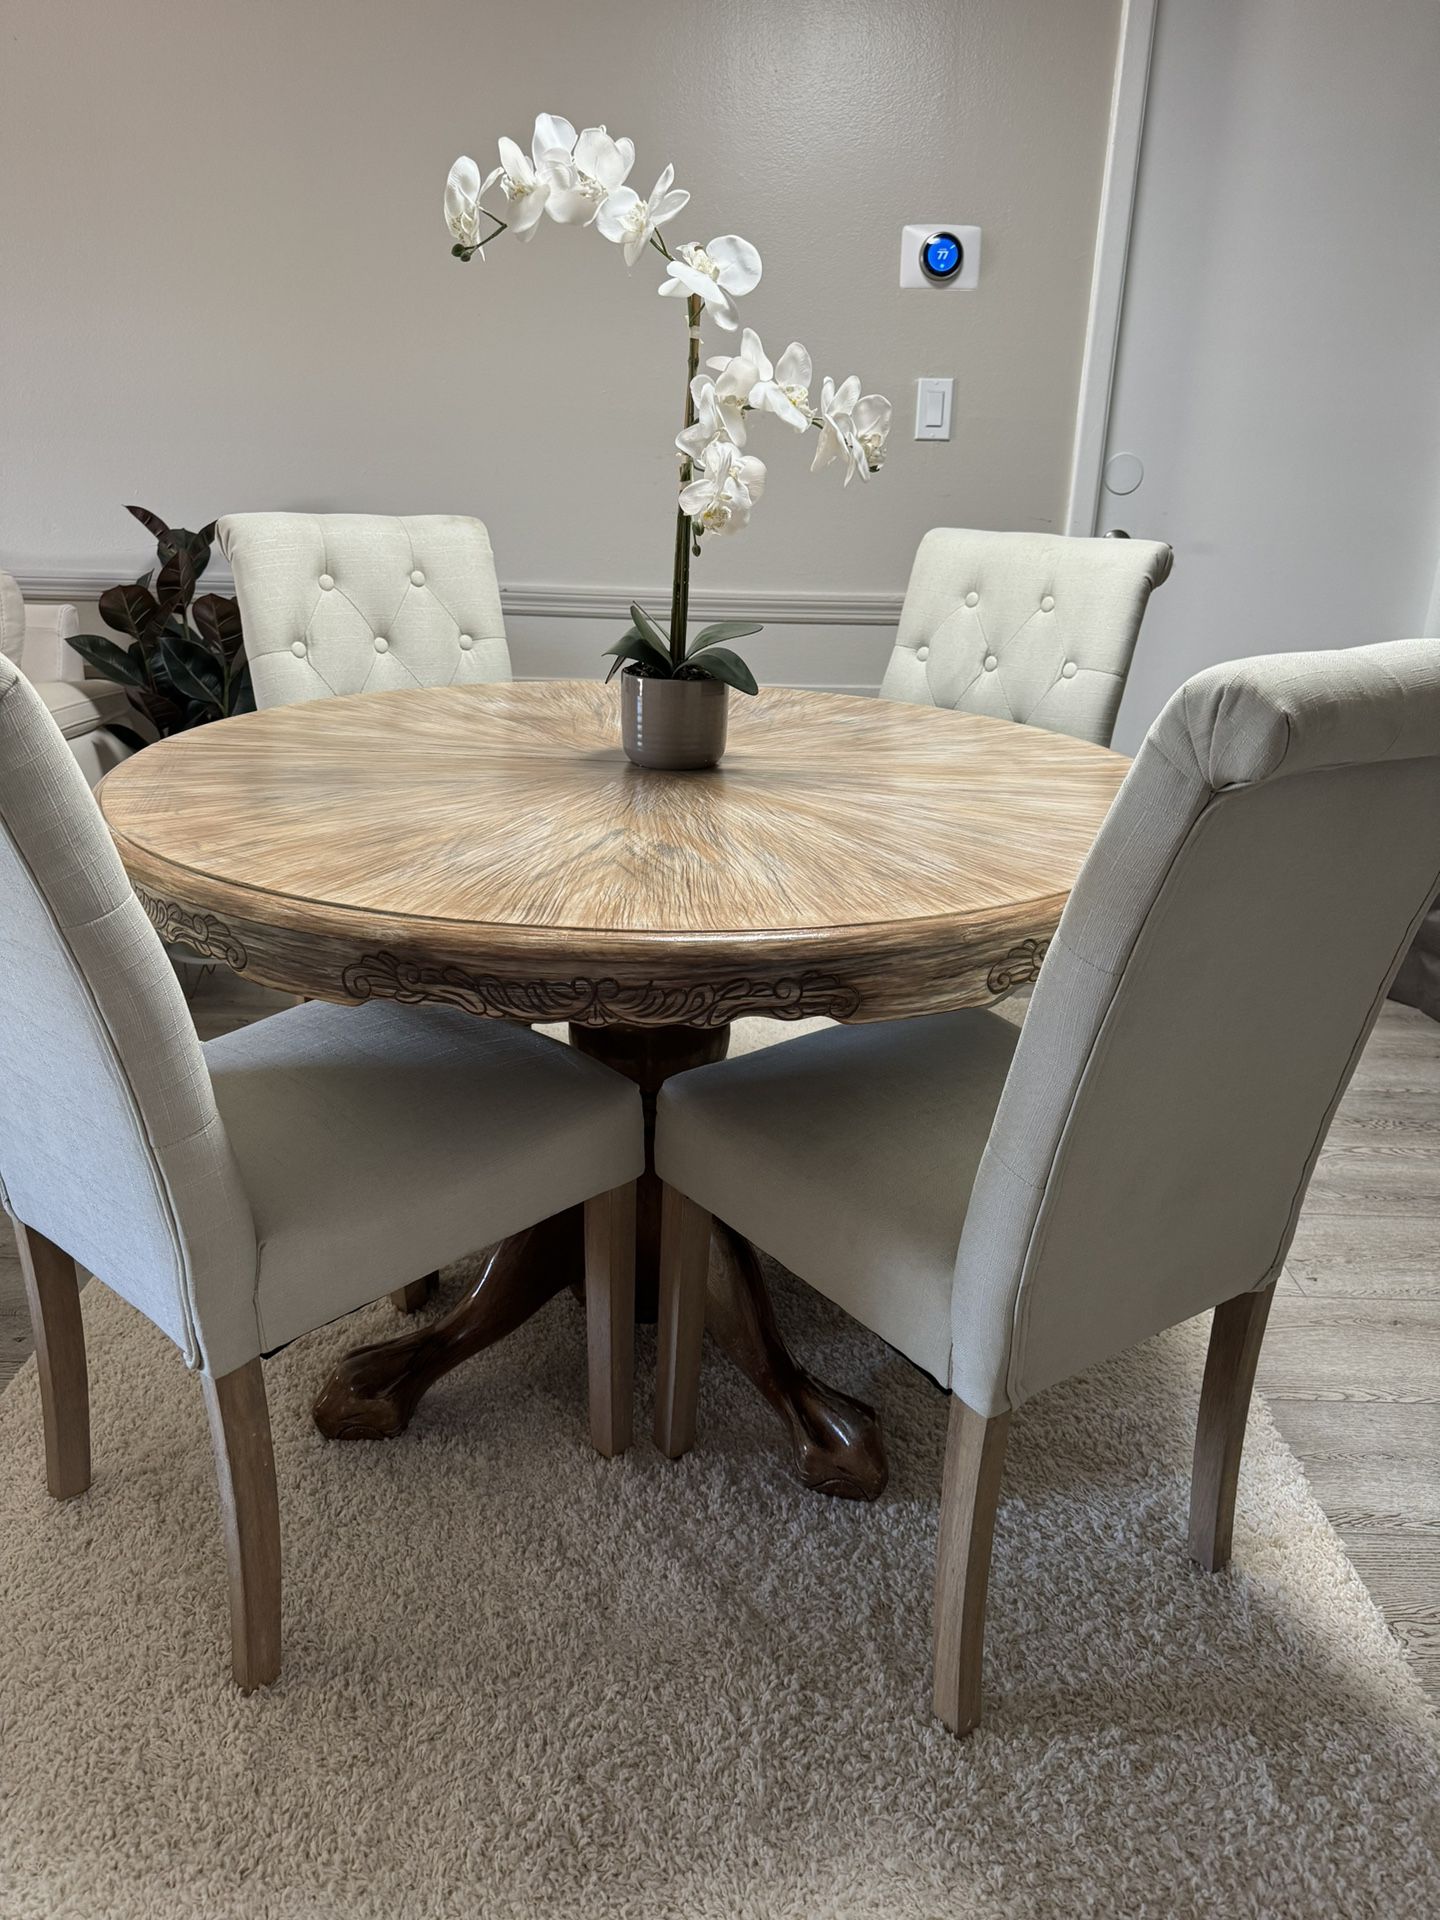 Round Distressed Dining Table And Chairs 